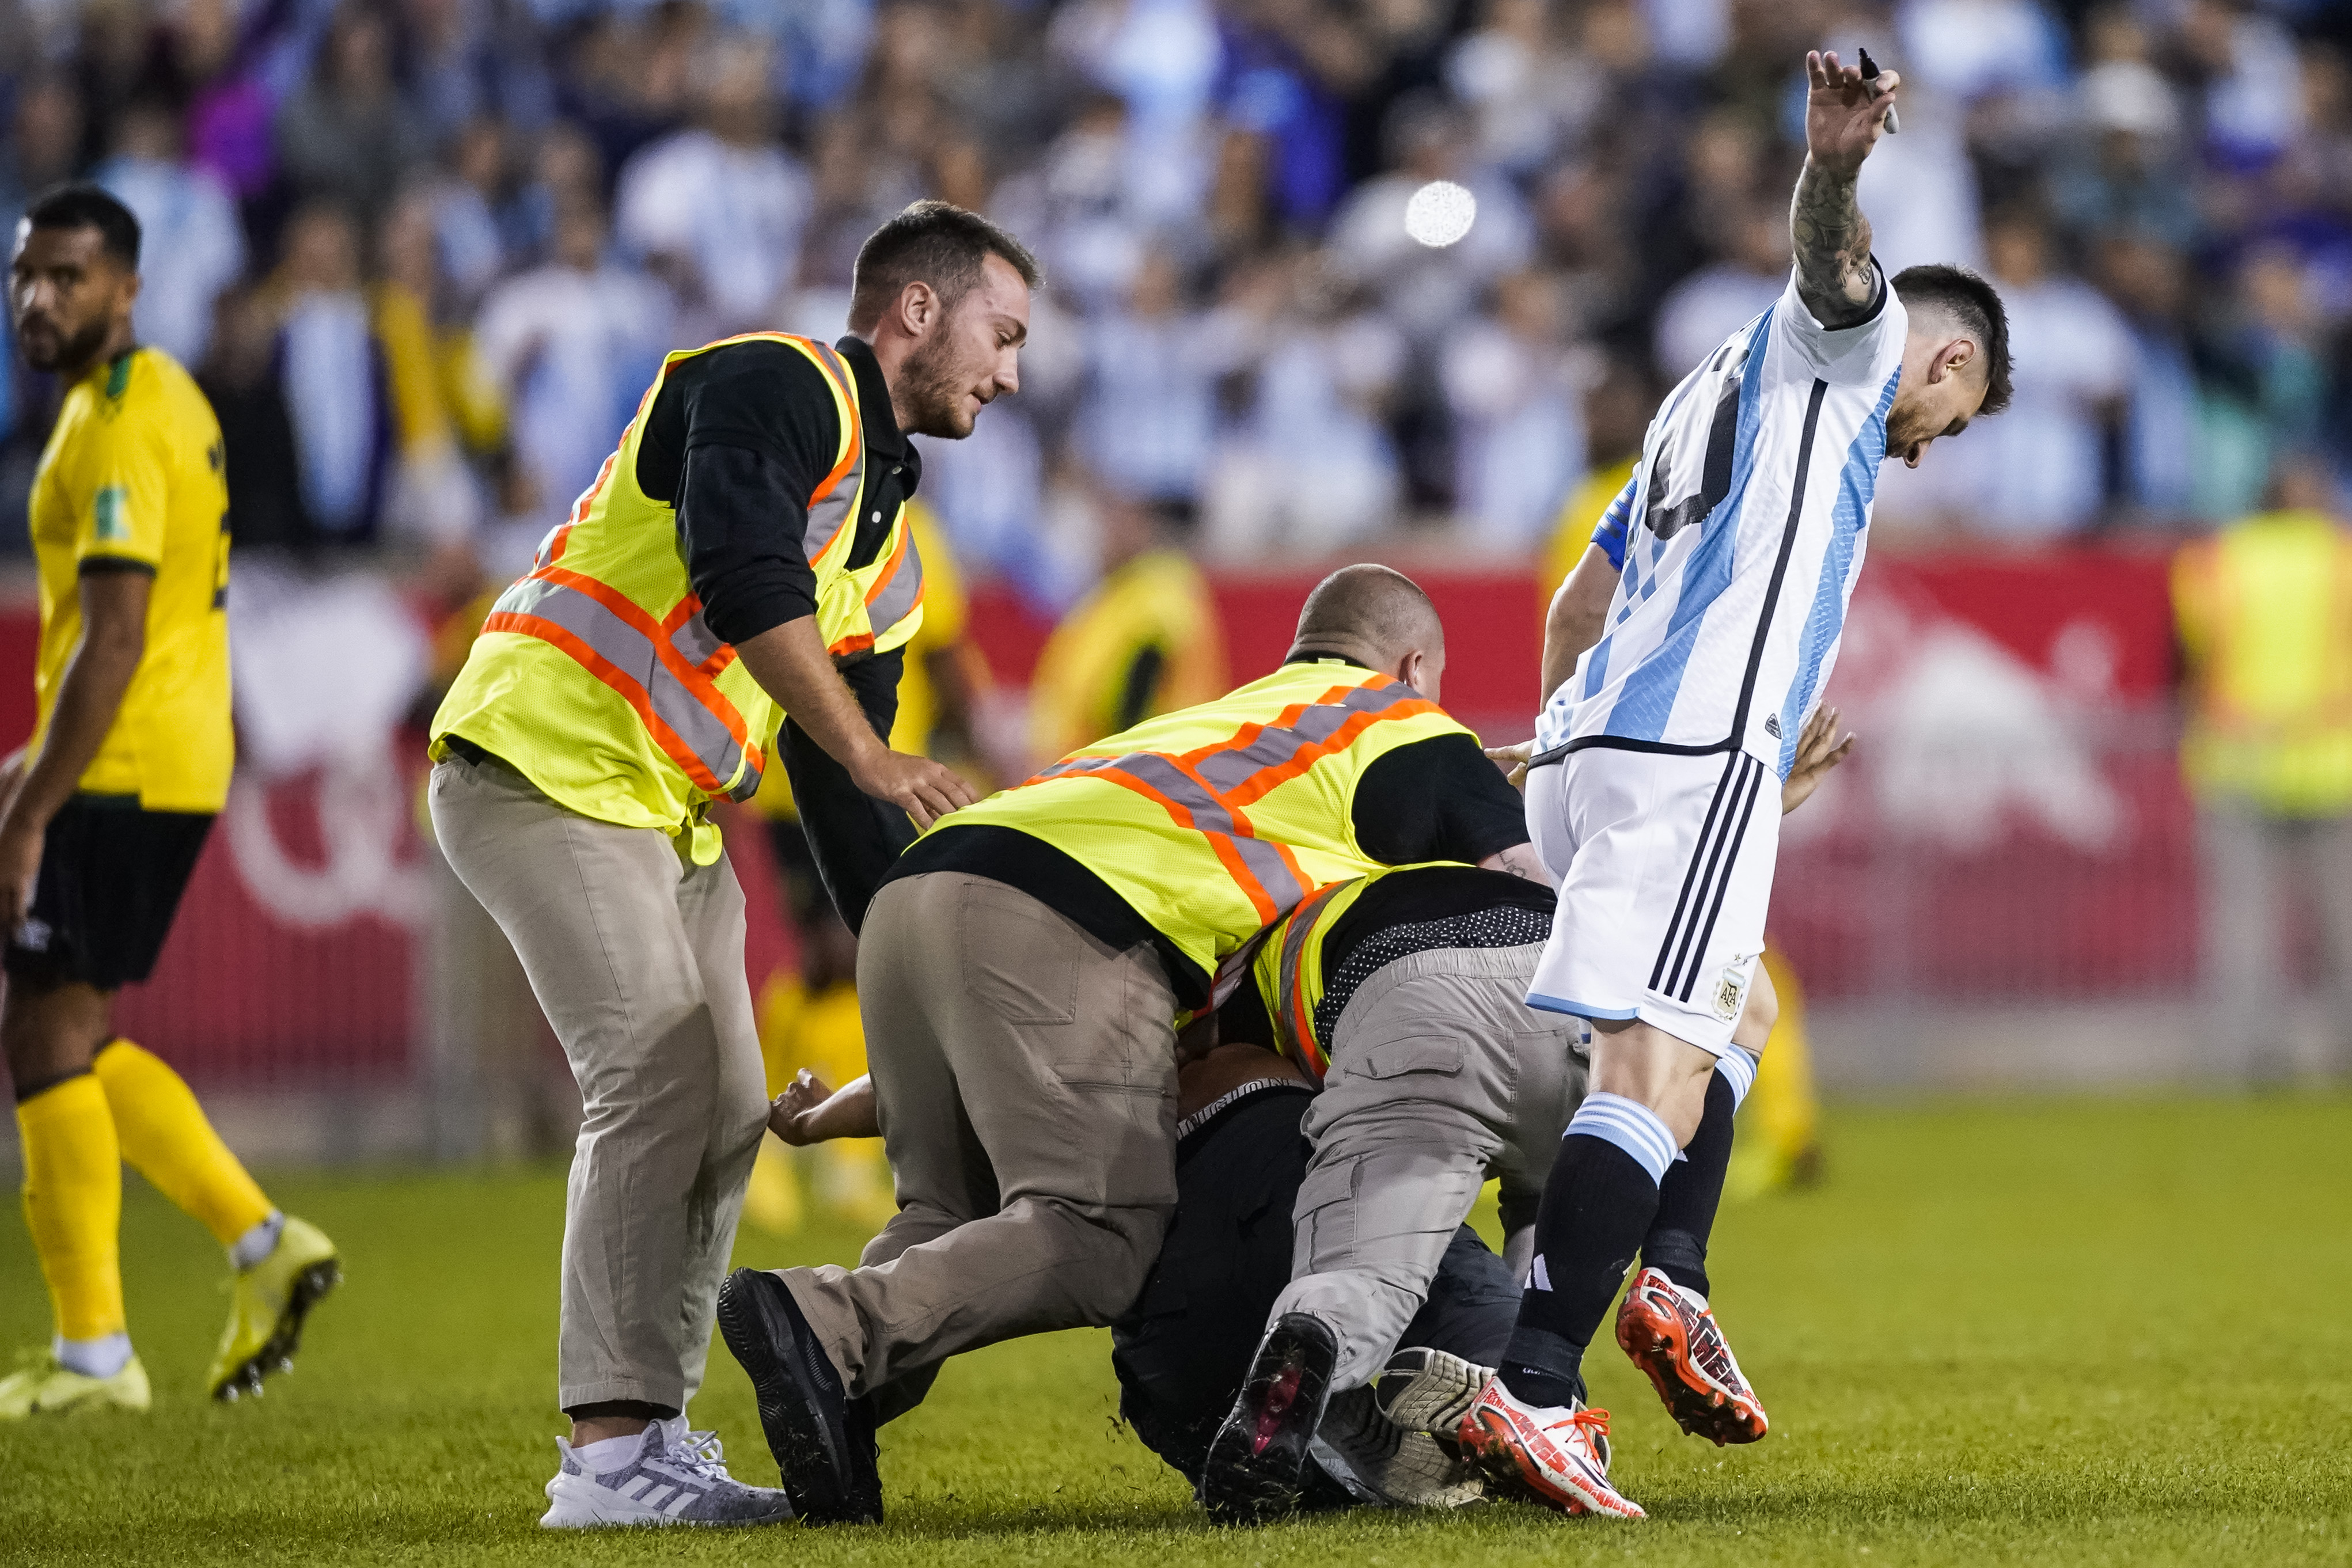 A fan is tackled as he tries to take a selfie with Argentina's Lionel Messi.